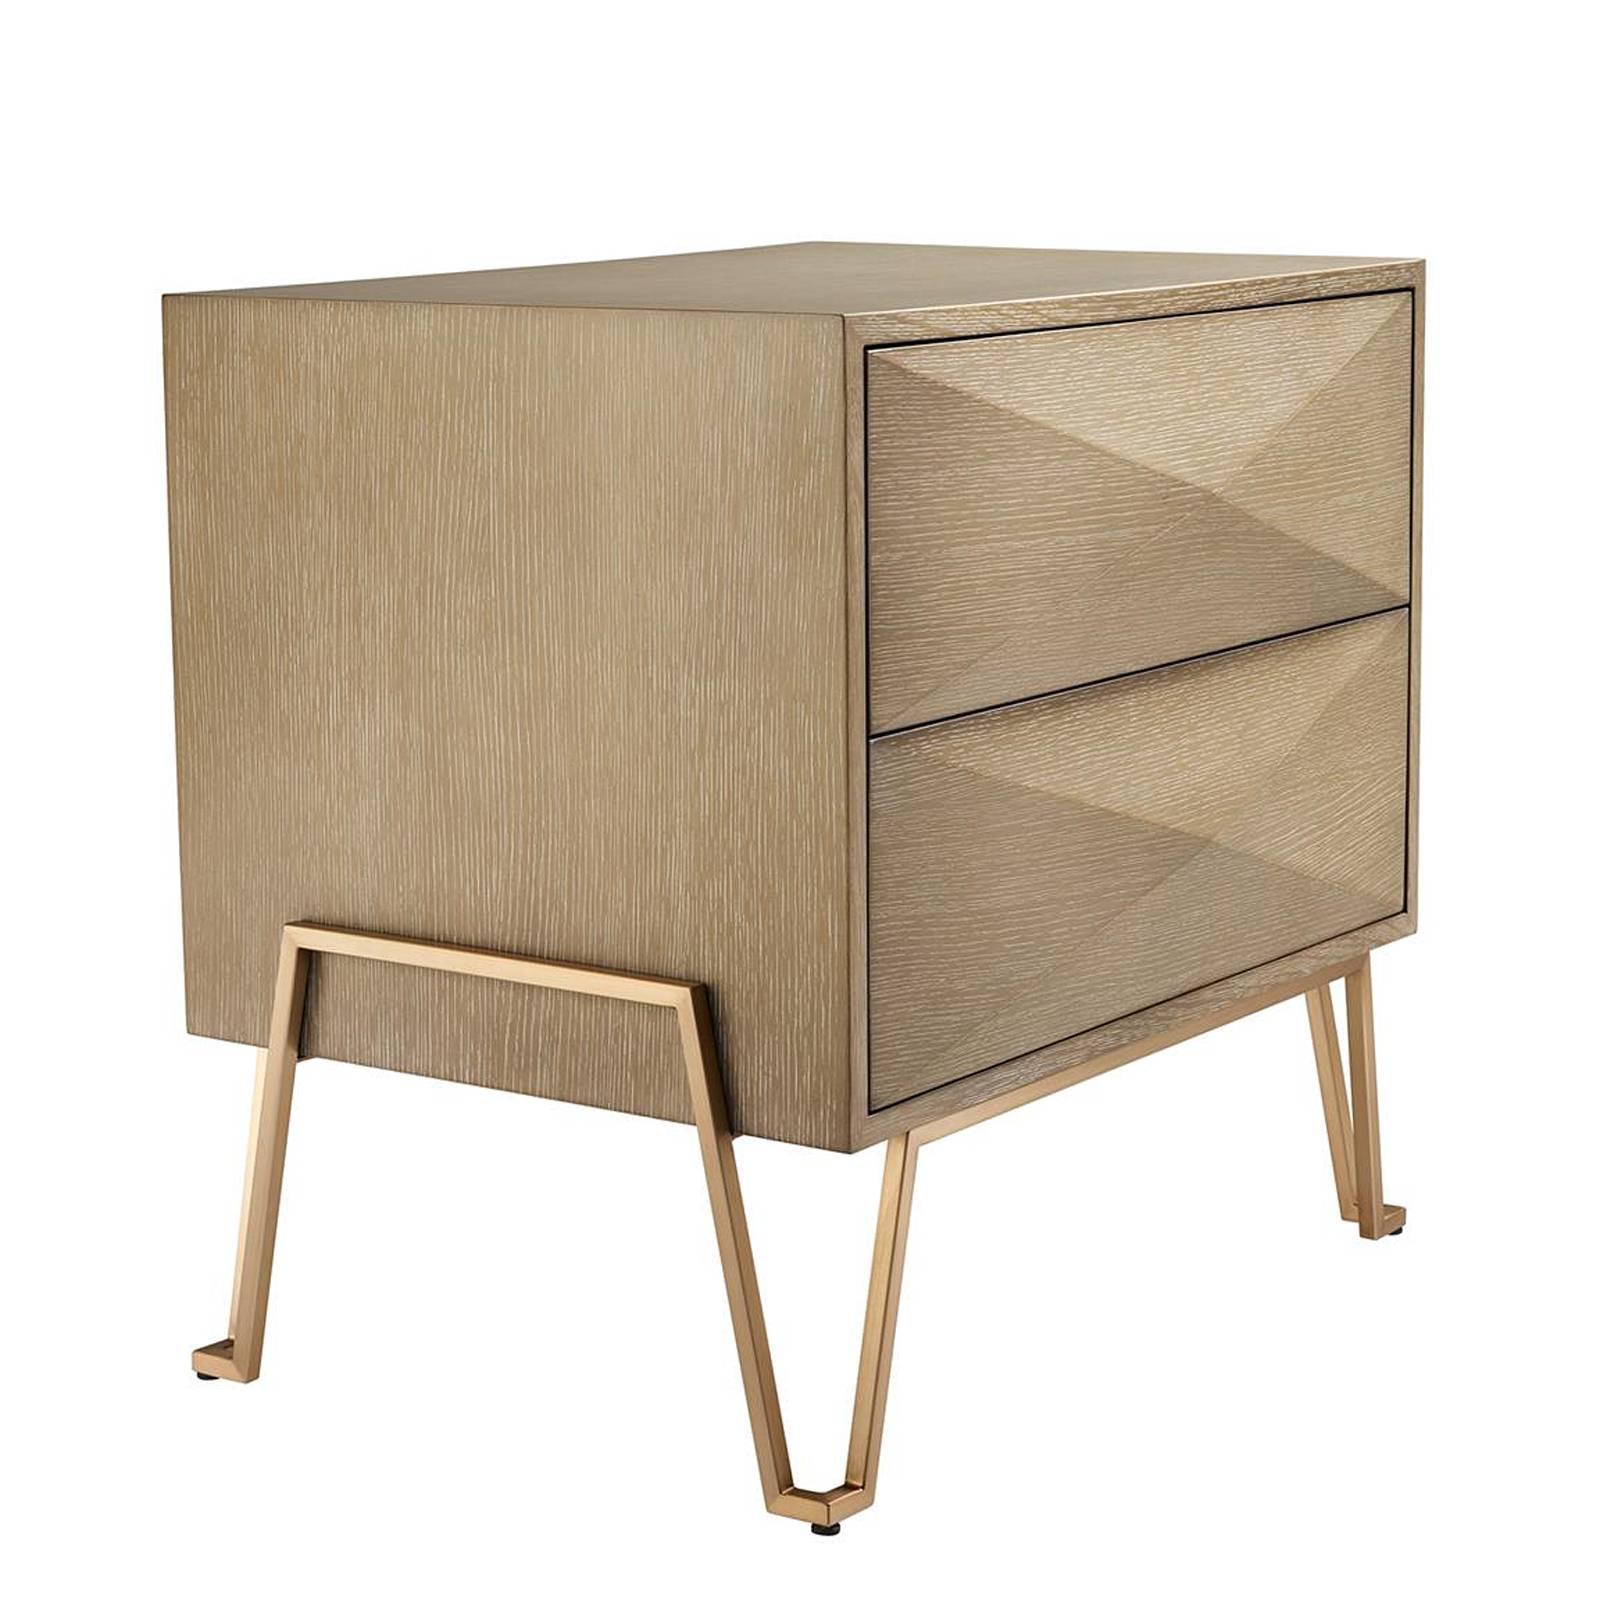 Indonesian Catalaga Side Table or Nightstand in Washed Oak Veneer and Brass For Sale